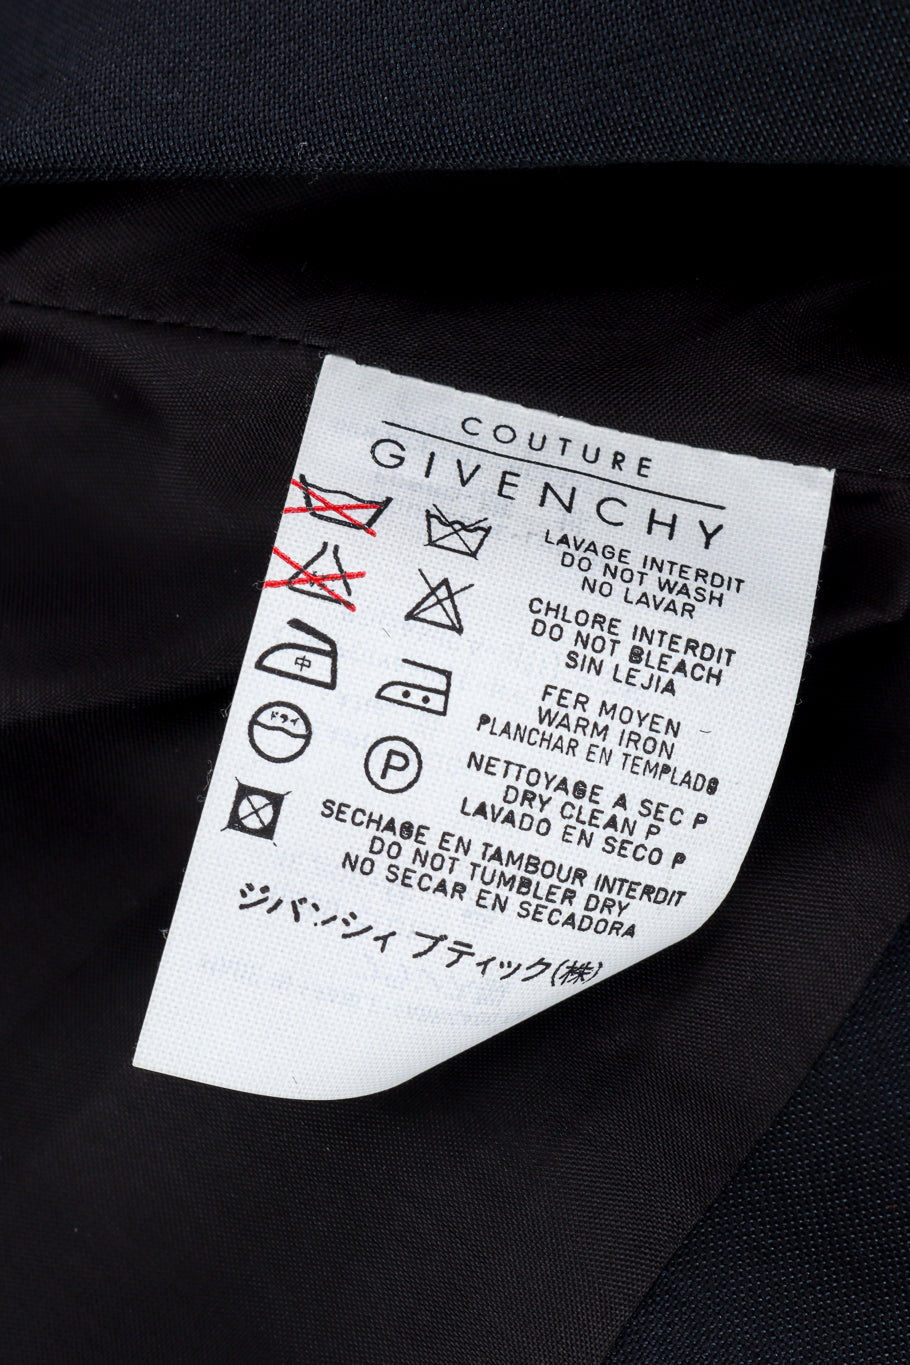 Givenchy Couture Bell Sleeve Bolero care label @recessla